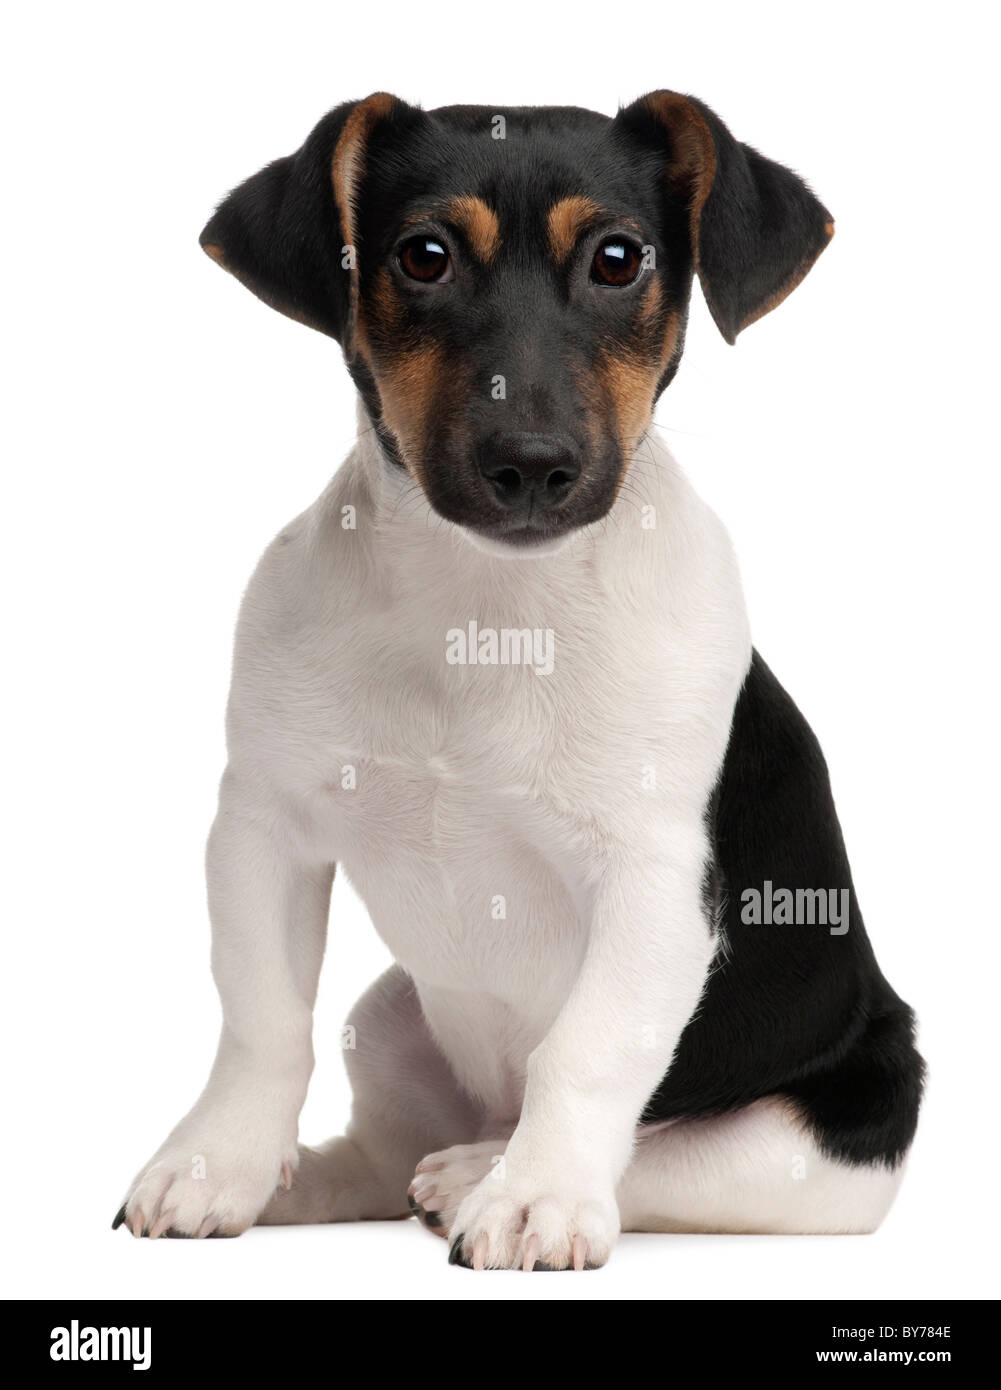 Jack Russell Terrier puppy, 5 months old, sitting in front of white background Stock Photo